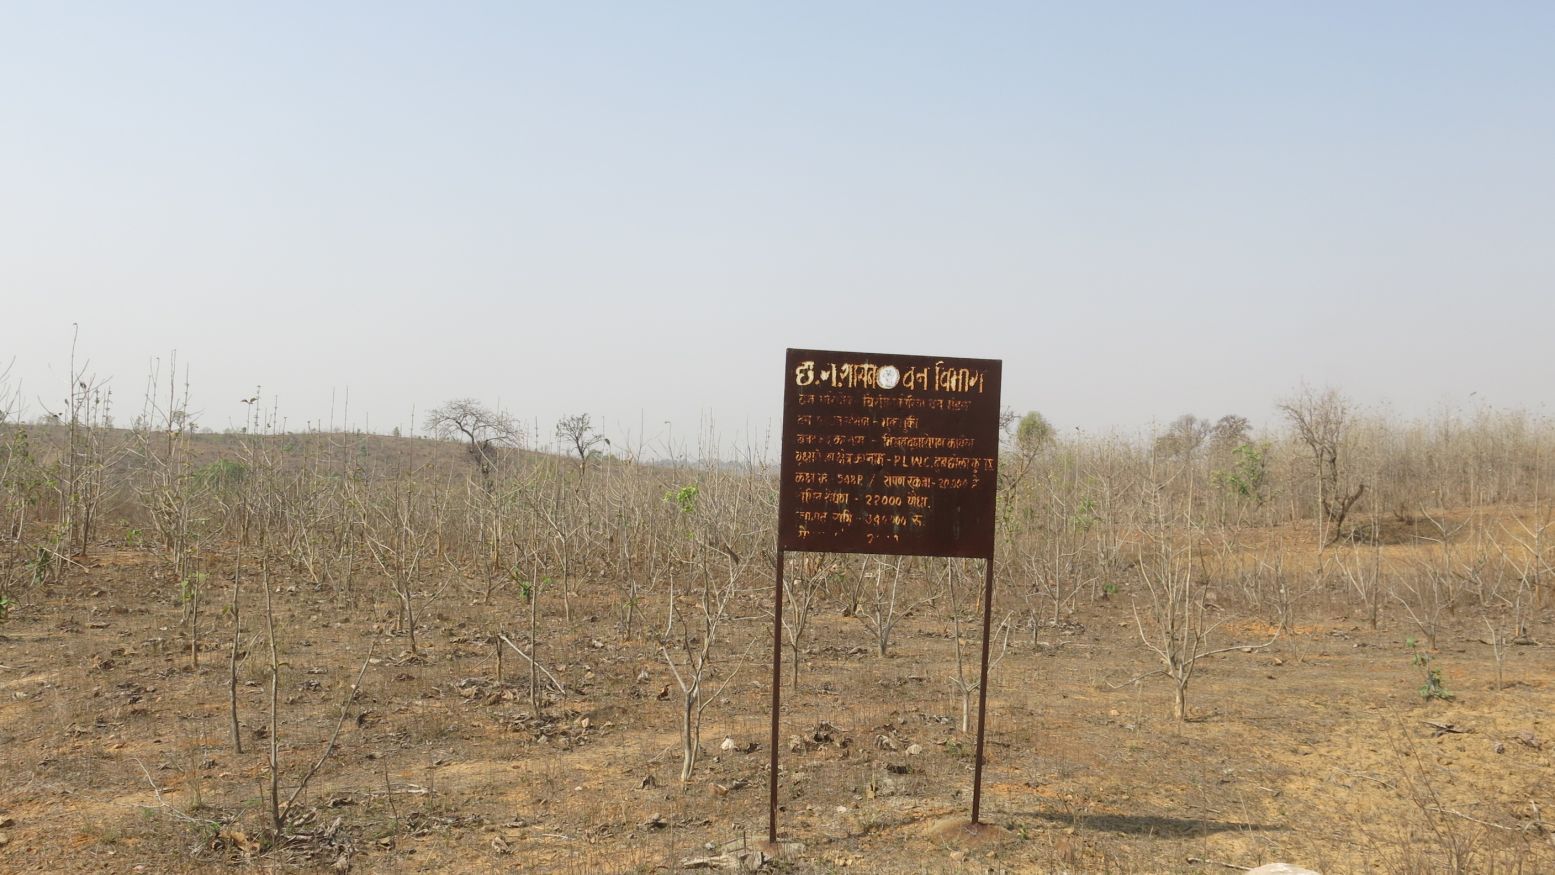 In Korea district in Chhattisgarh, a forest department plantation of 22,000 trees forms a desolate expanse. The government counts such plantations as forests, and has made them a key component of its international commitments of increasing forest cover to mitigate climate change. Chhattisgarh, India. June 2019. Image by Chitrangada Choudhury